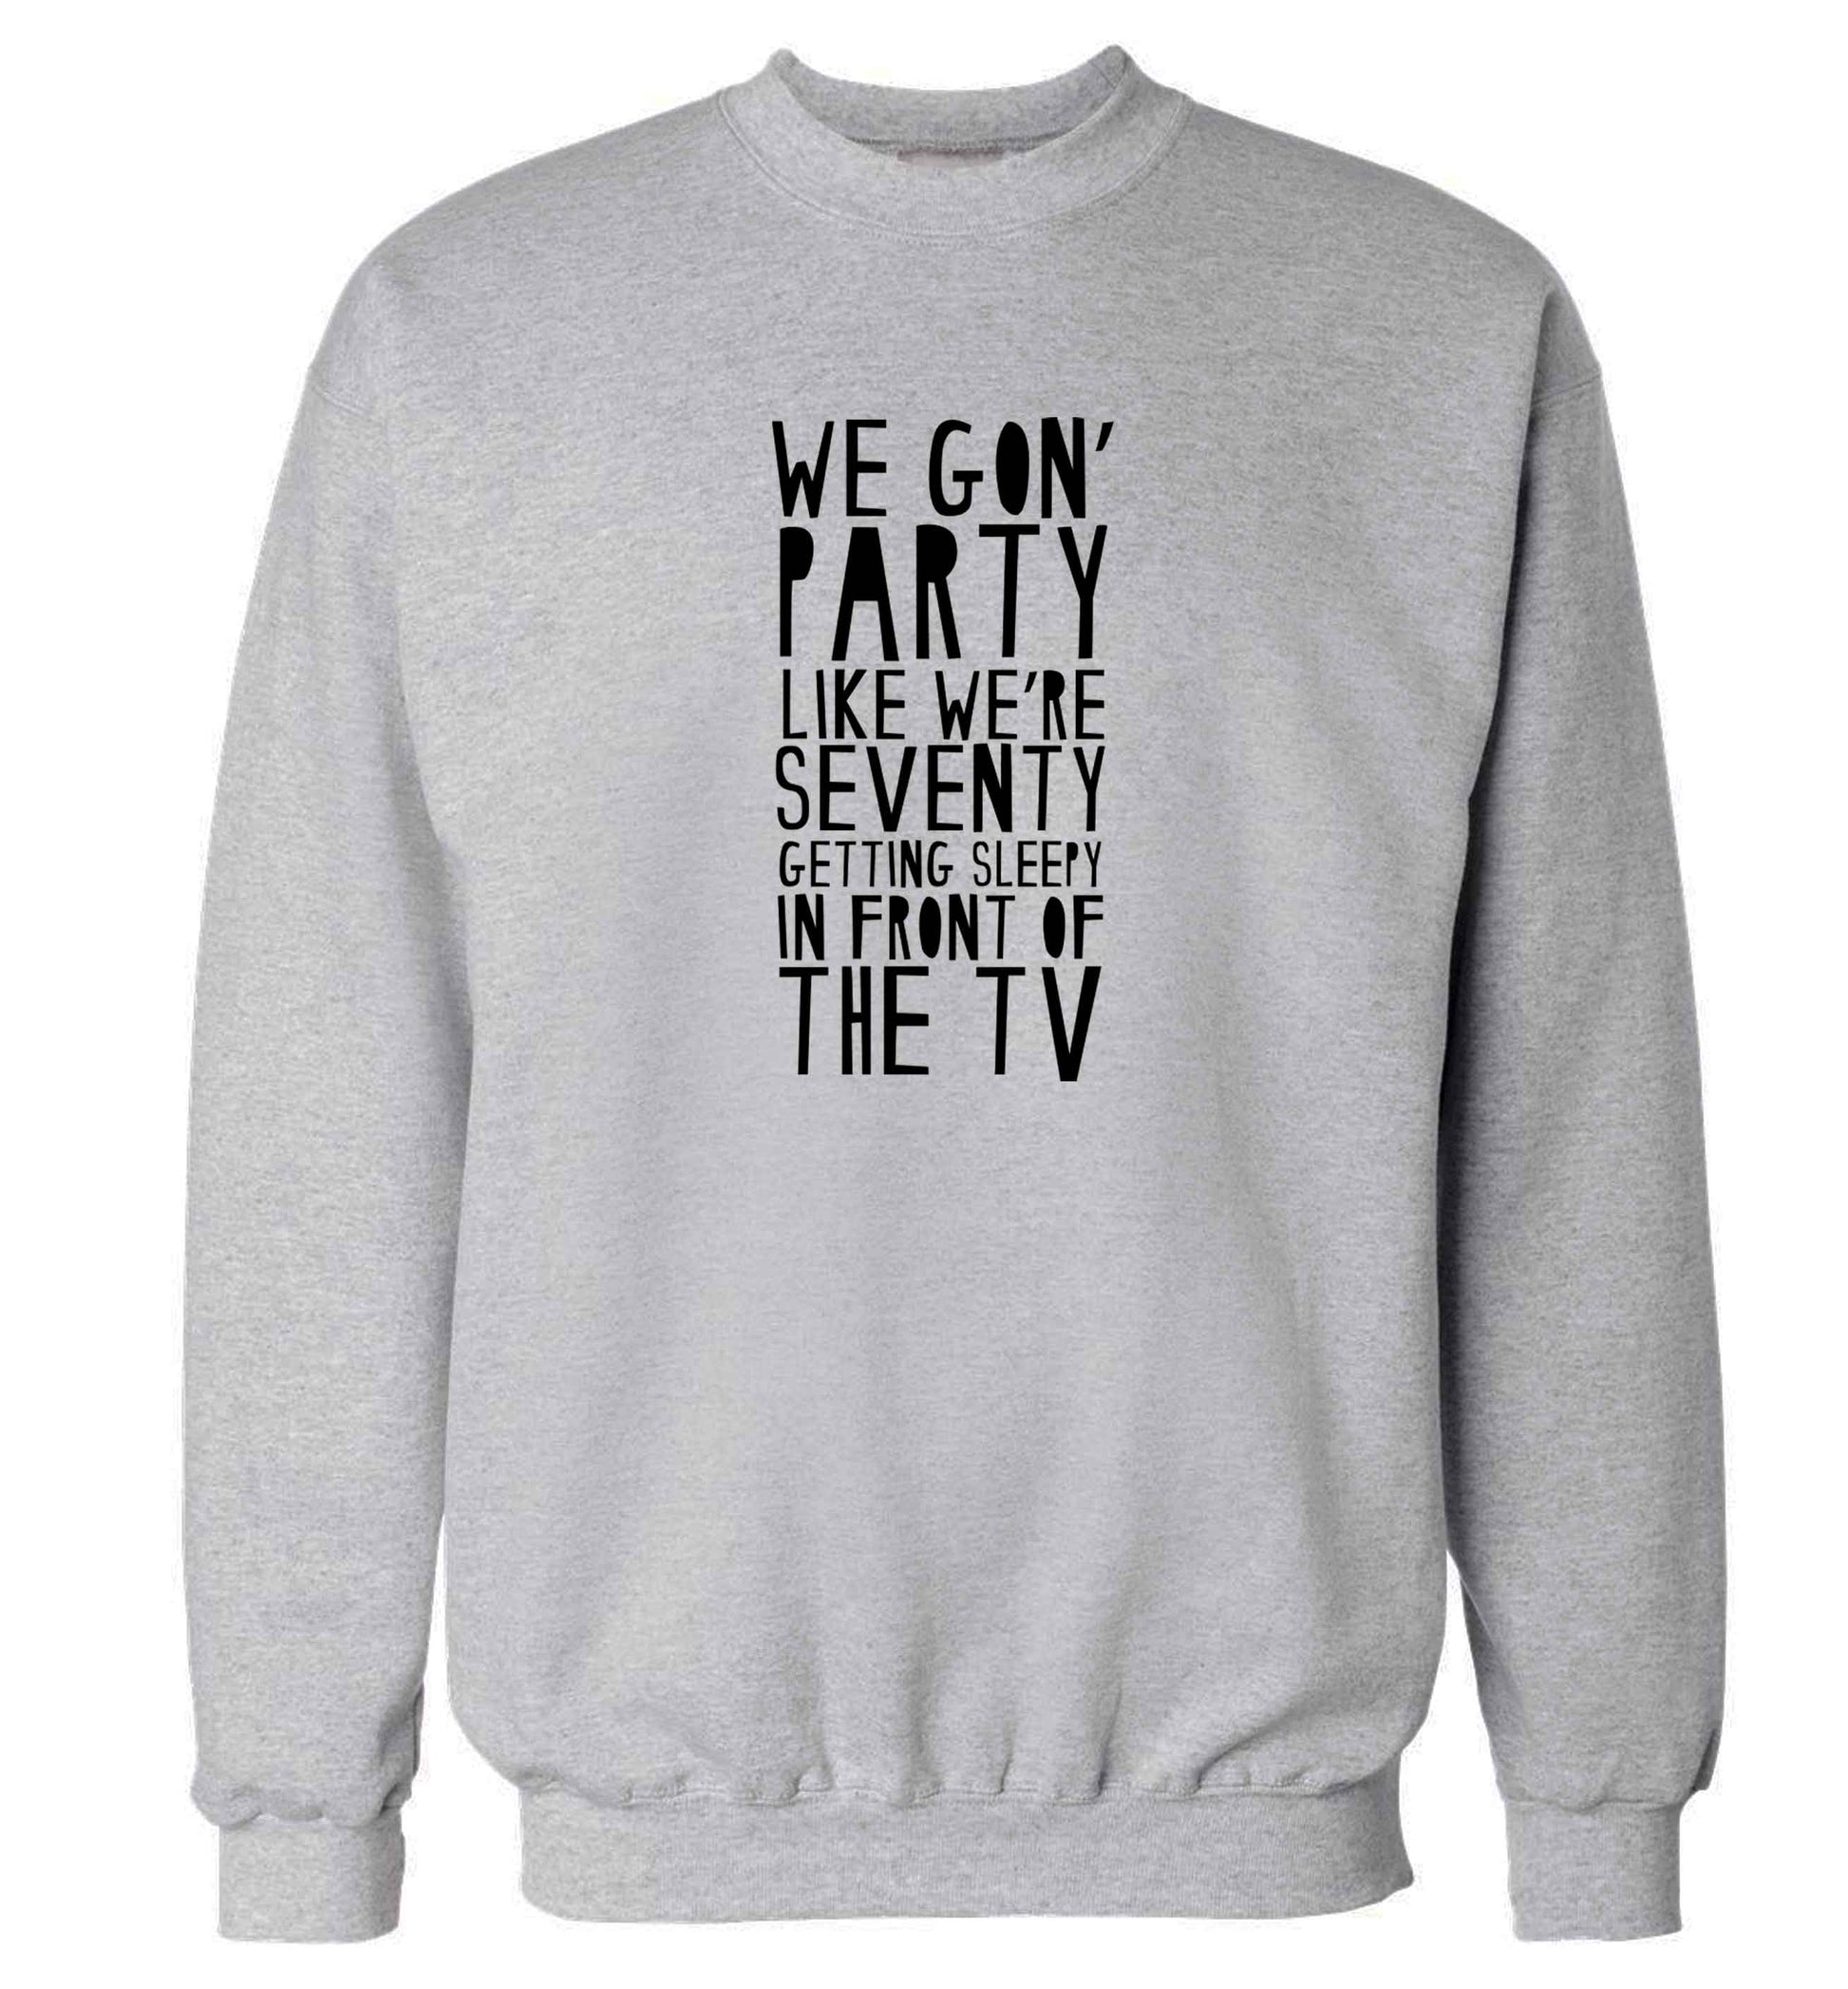 We gon' party like we're seventy getting sleepy in front of the TV adult's unisex grey sweater 2XL